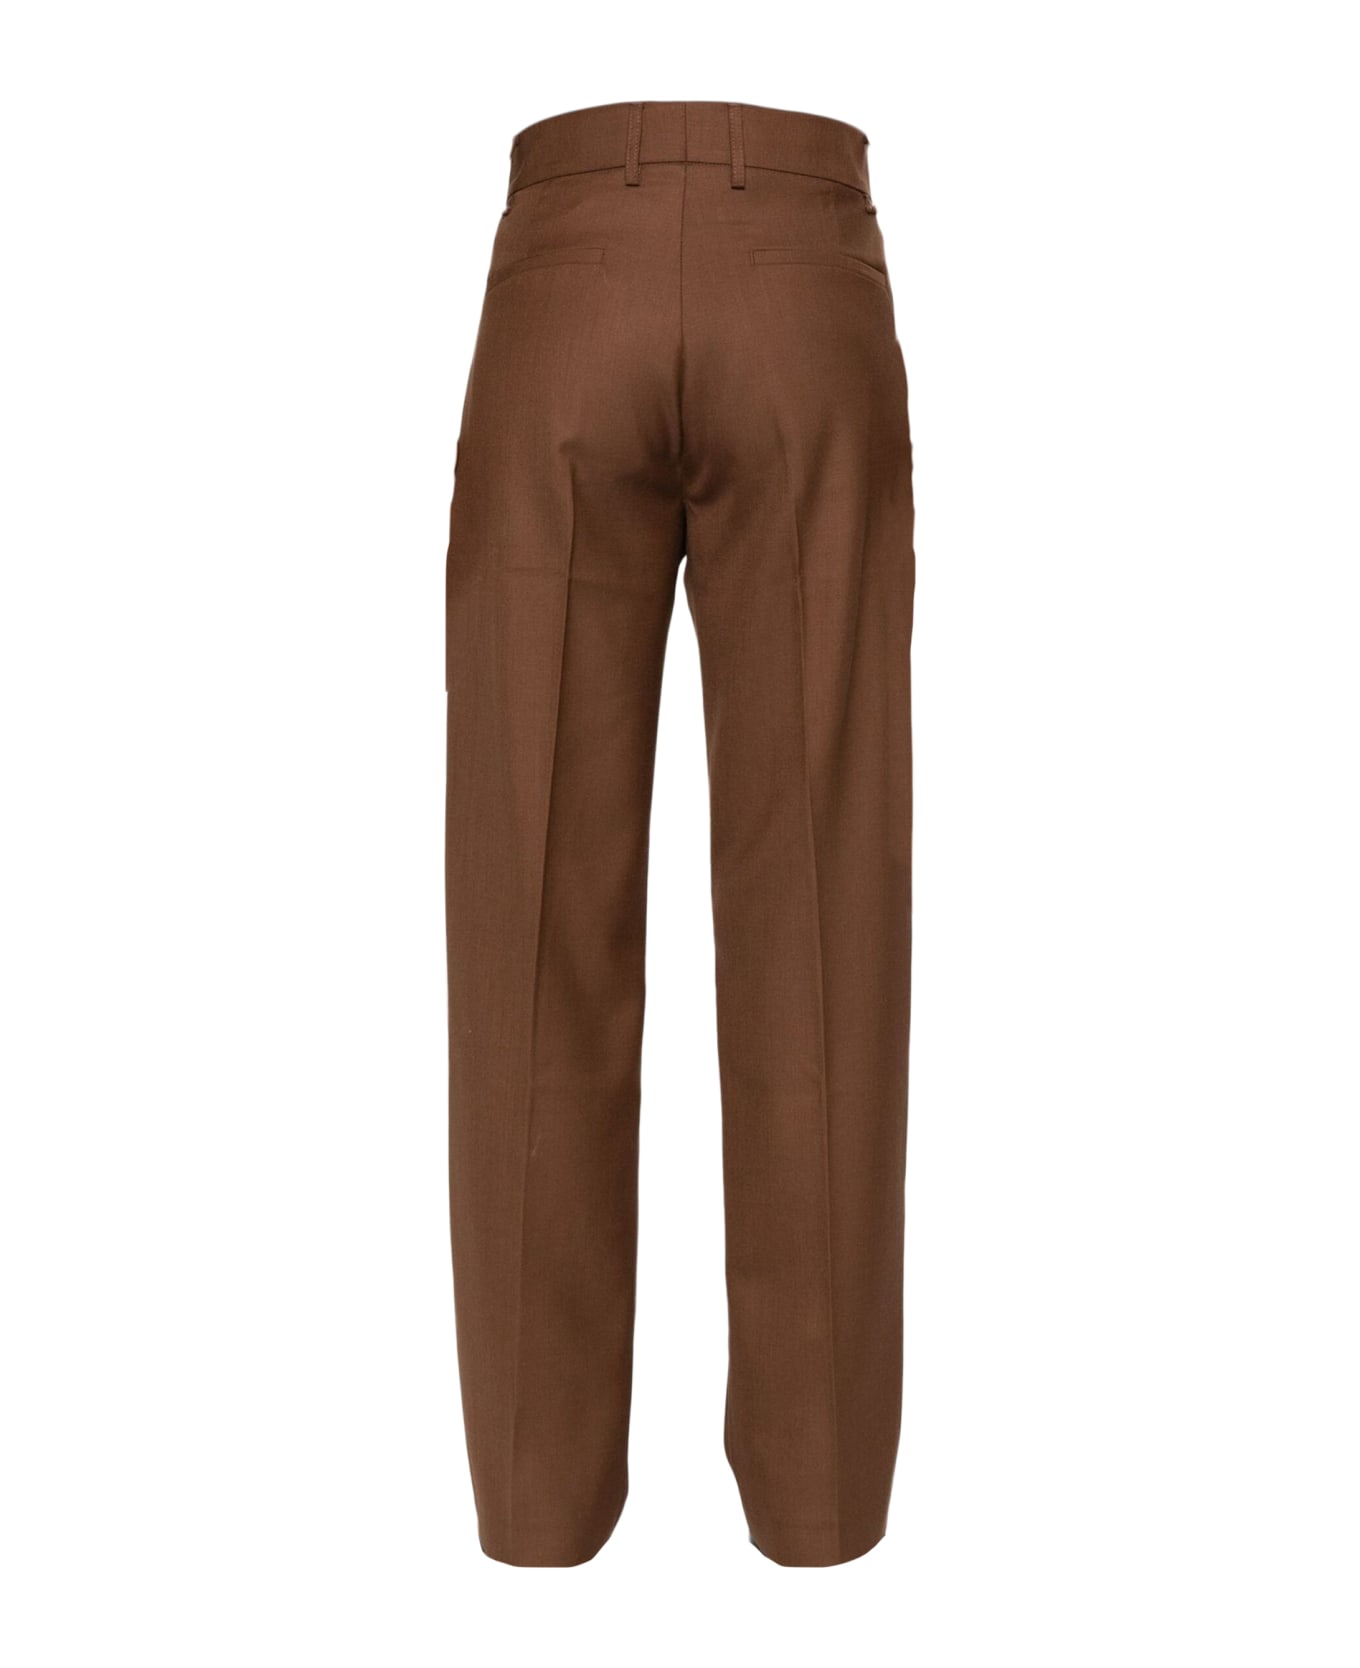 Séfr Sefr Trousers Brown - Brown ボトムス